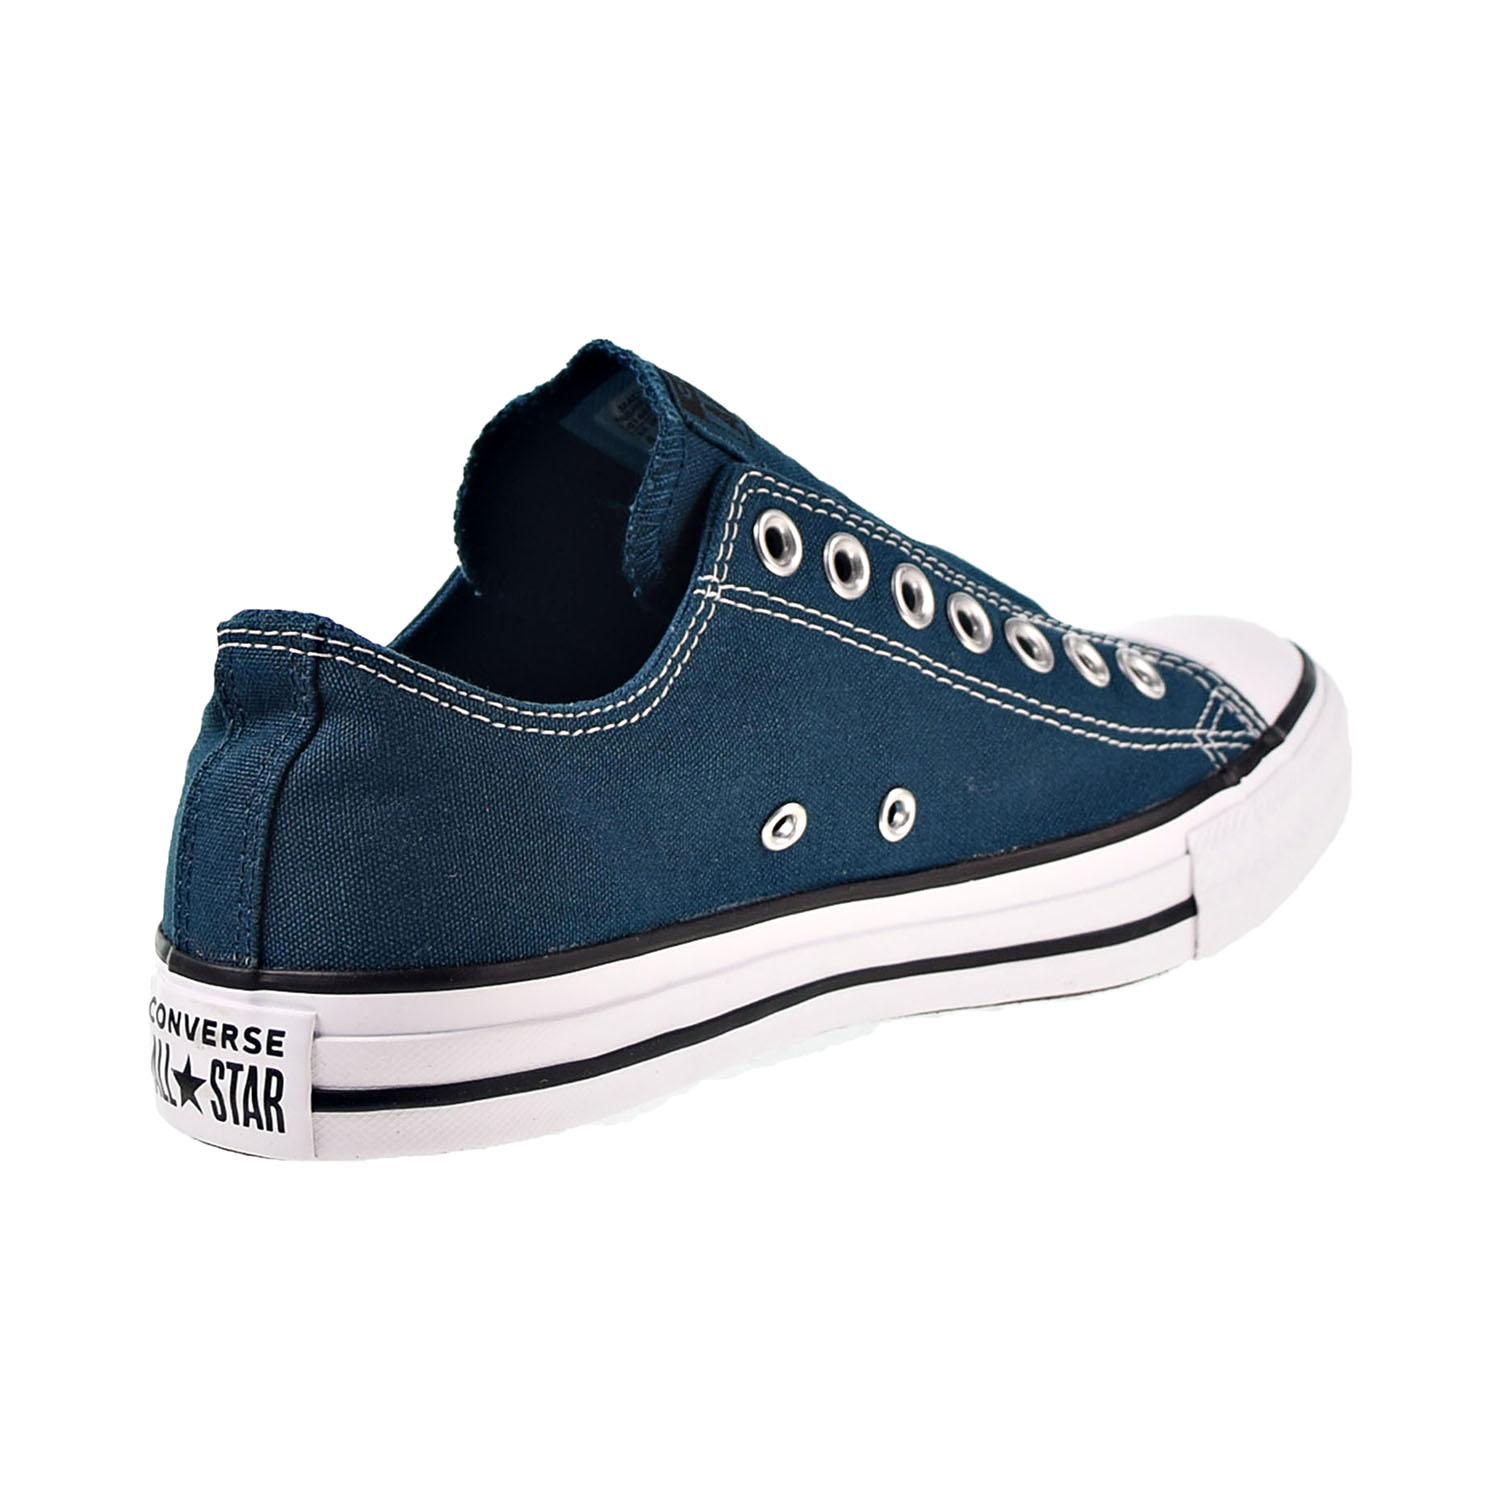 Converse Chuck Taylor All Star Slip Men's Shoes Midnight Turq-Black-White 166146f - image 4 of 6